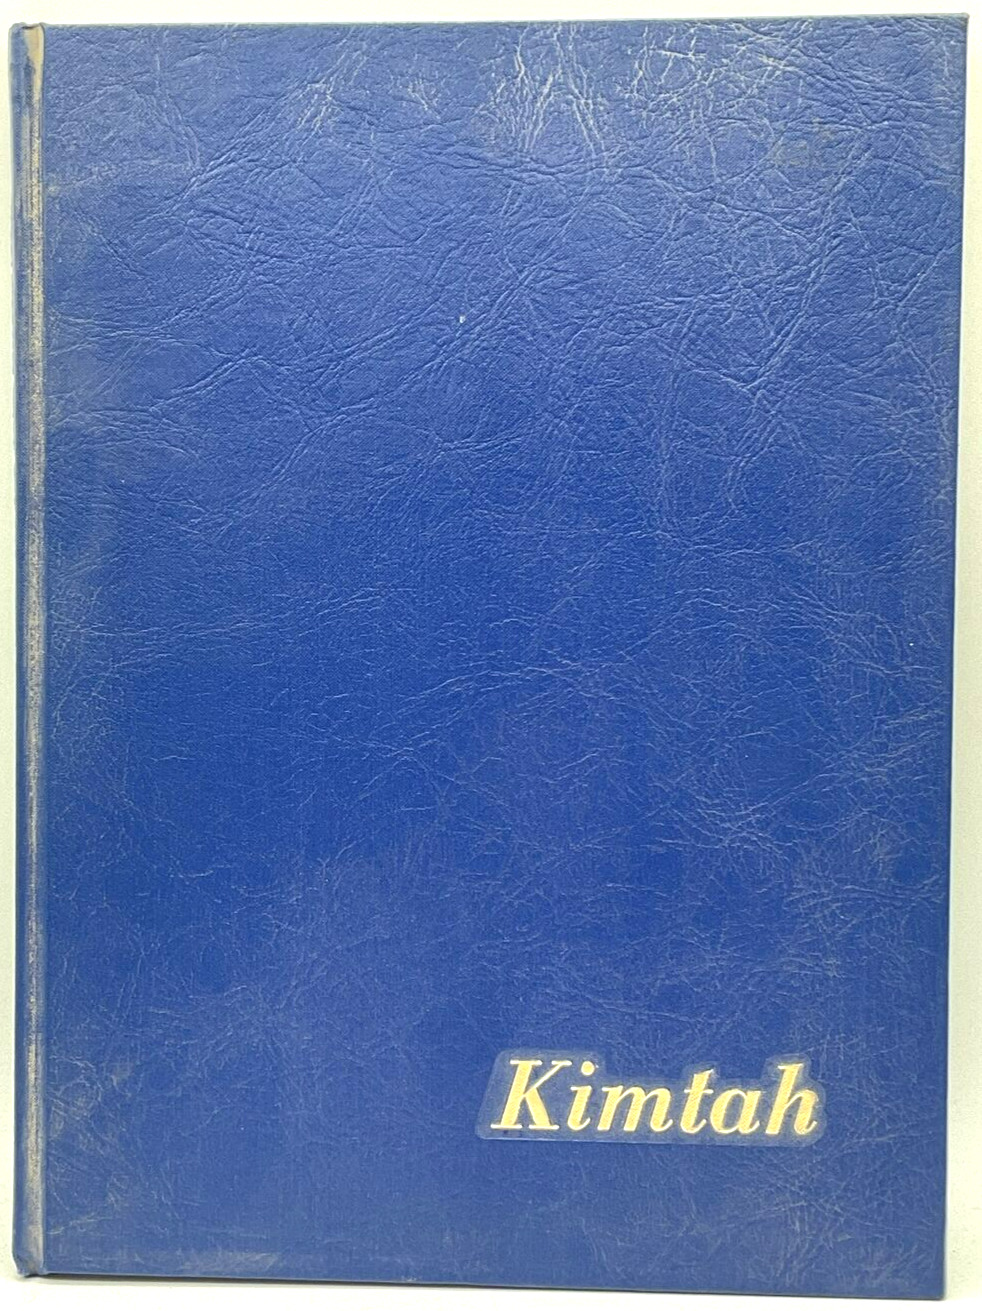 1966 West Seattle High School Annual Yearbook Kimtah Washington Sports Students